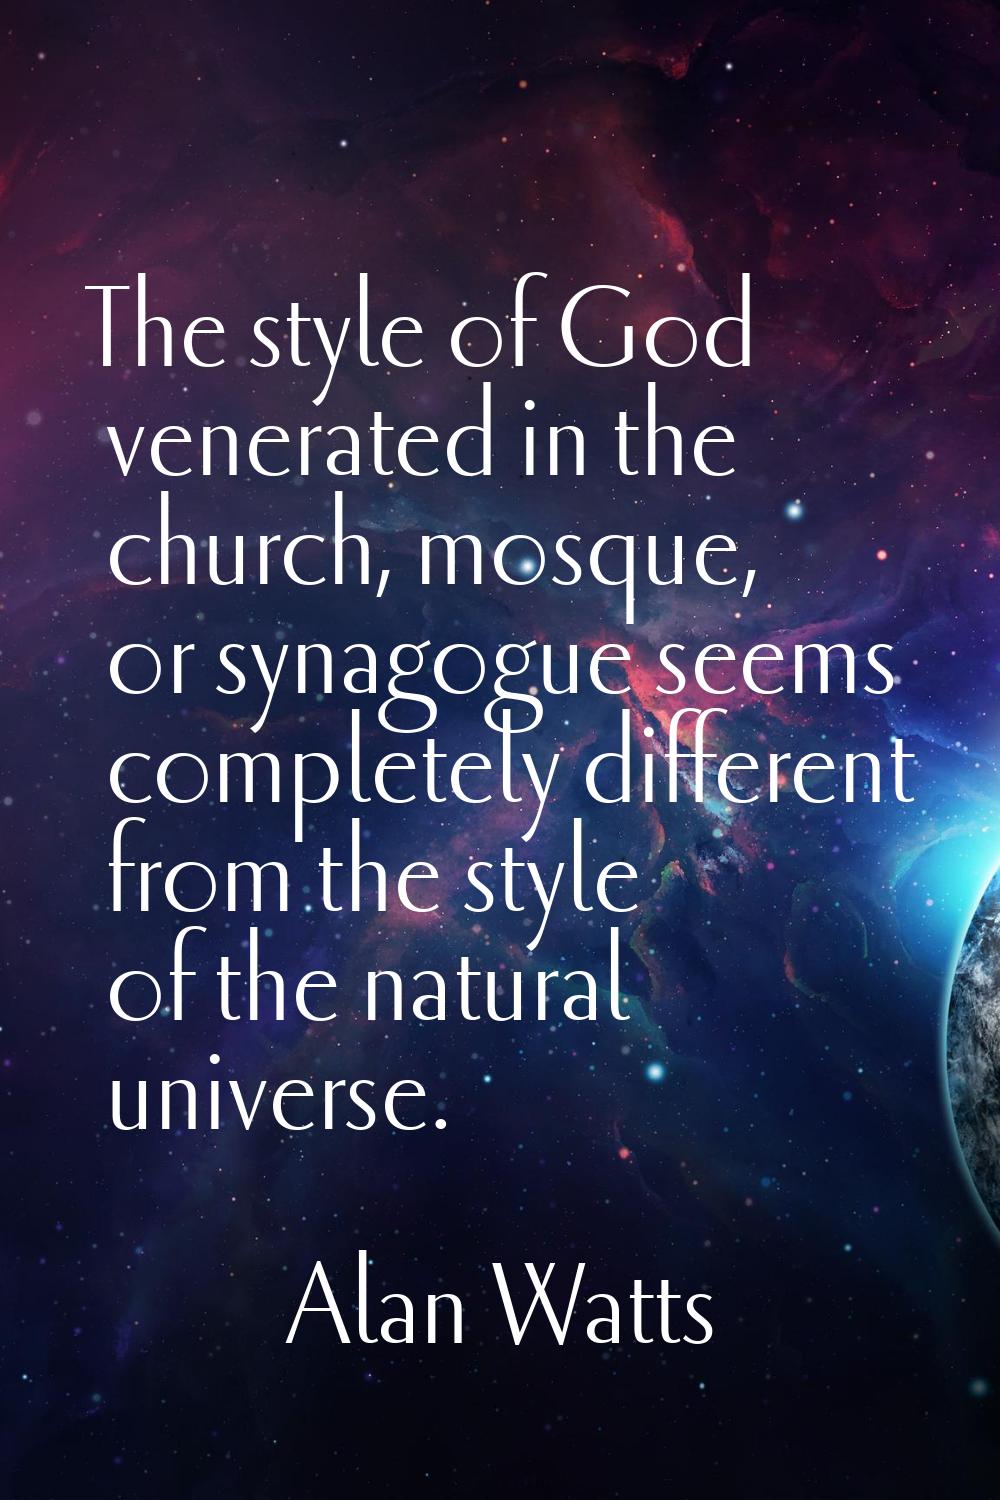 The style of God venerated in the church, mosque, or synagogue seems completely different from the 